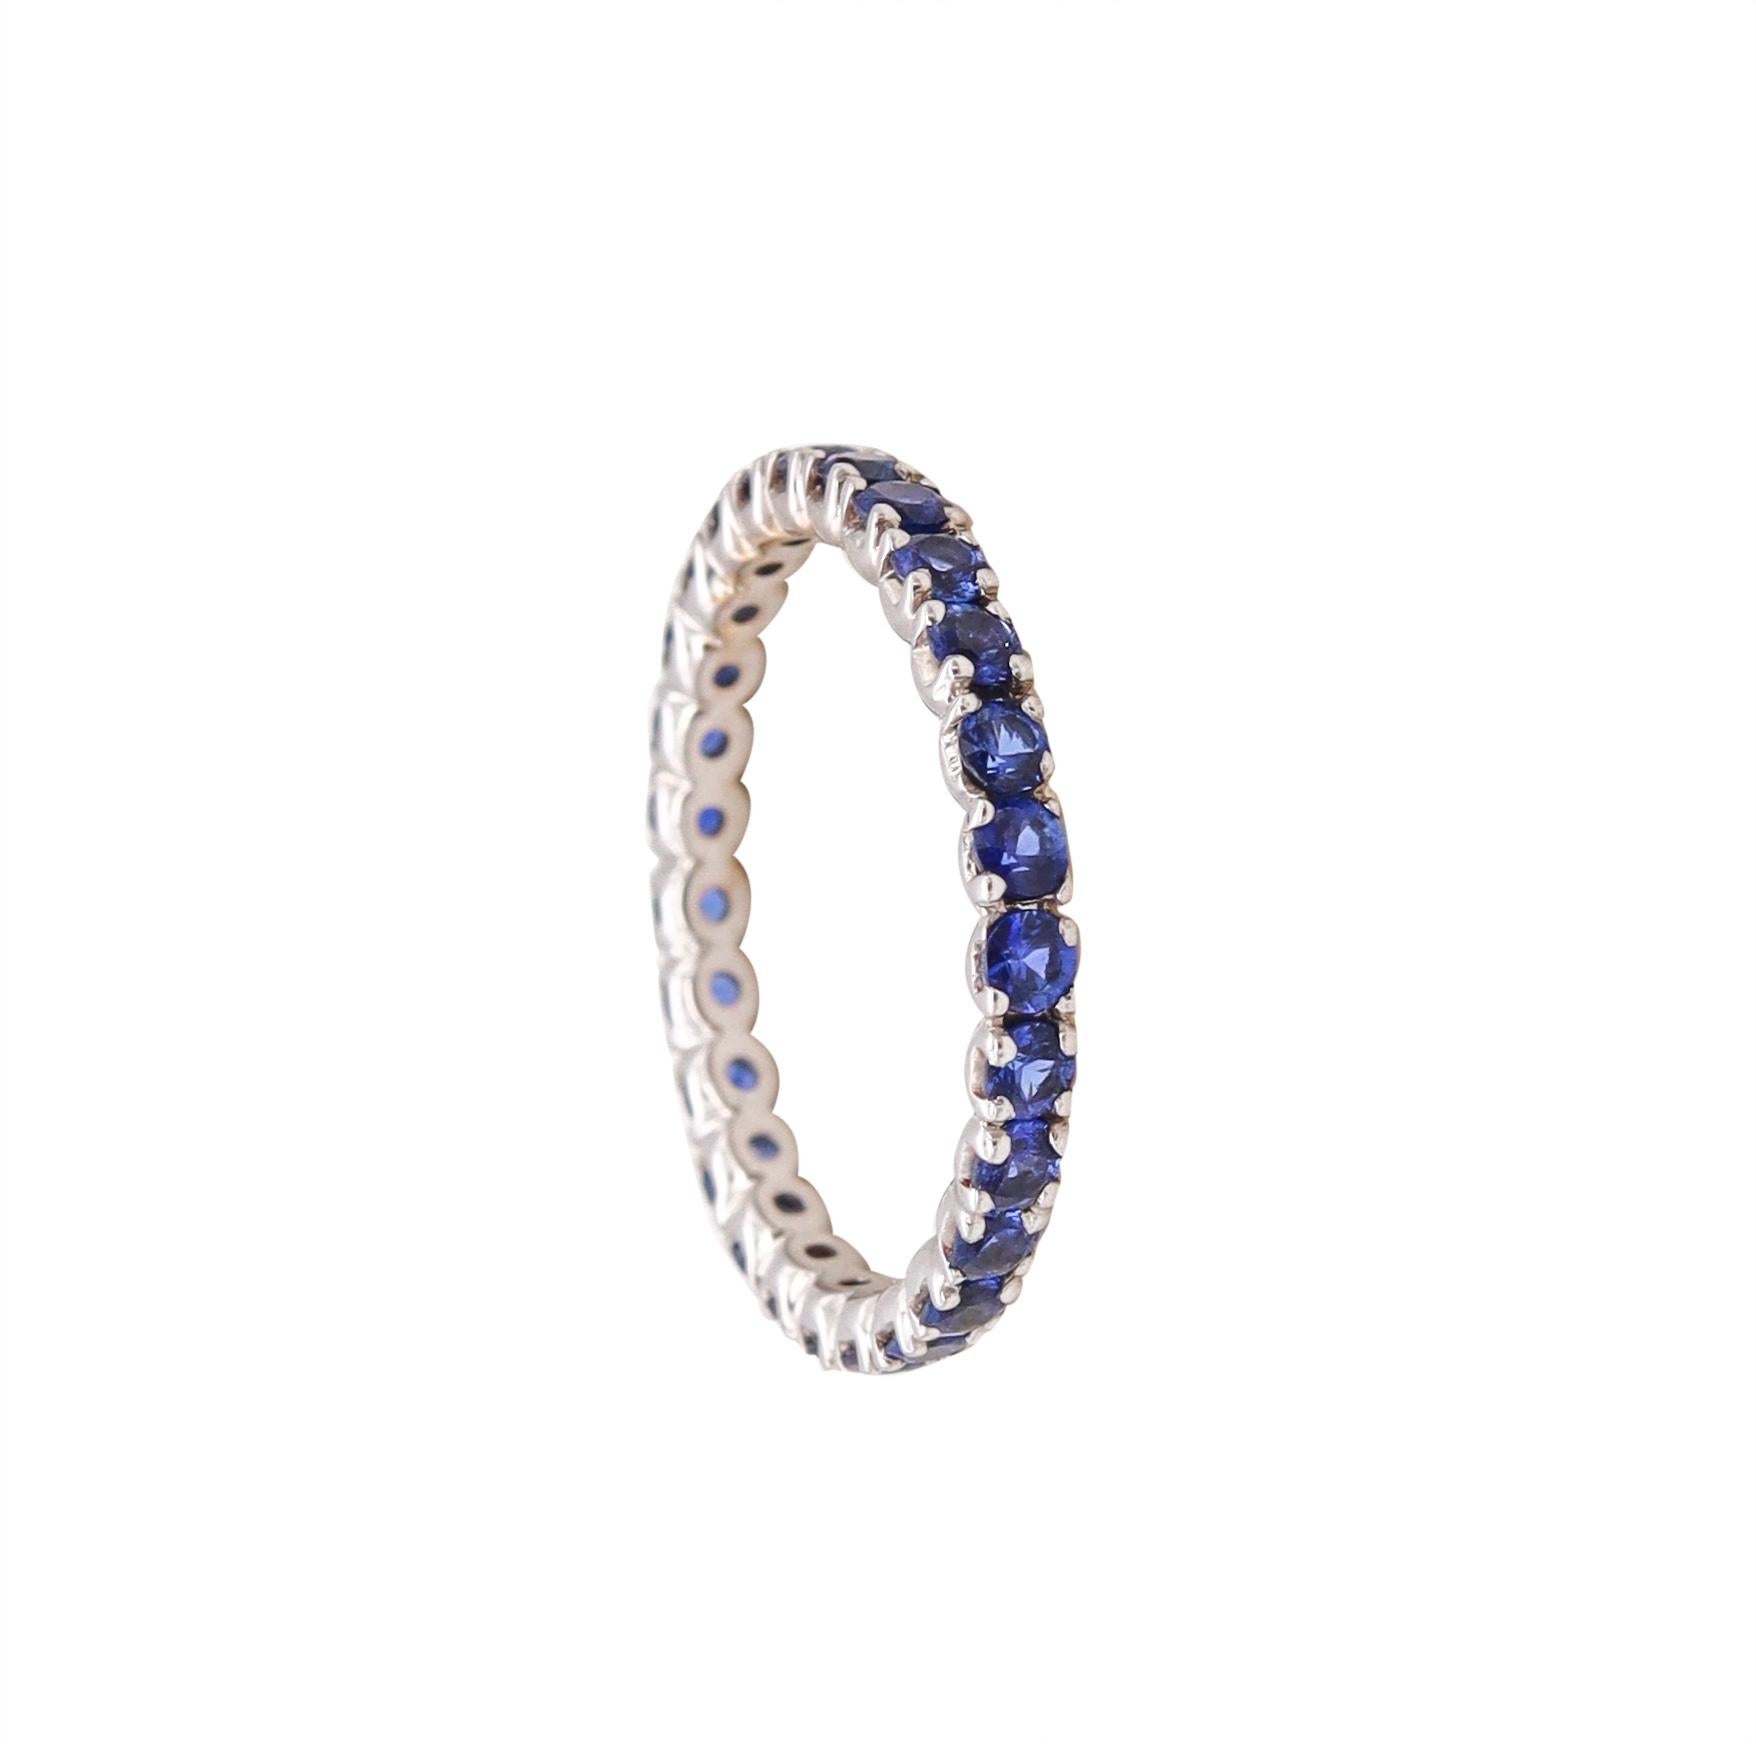 Eternity ring with Blue Sapphires.

Modern full band carefully crafted in solid white gold of 18 karats, with high polished finish. It is mounted in a double row of prongs, with 27 calibrated round brilliant cuts of Ceylon Blue Sapphires

The